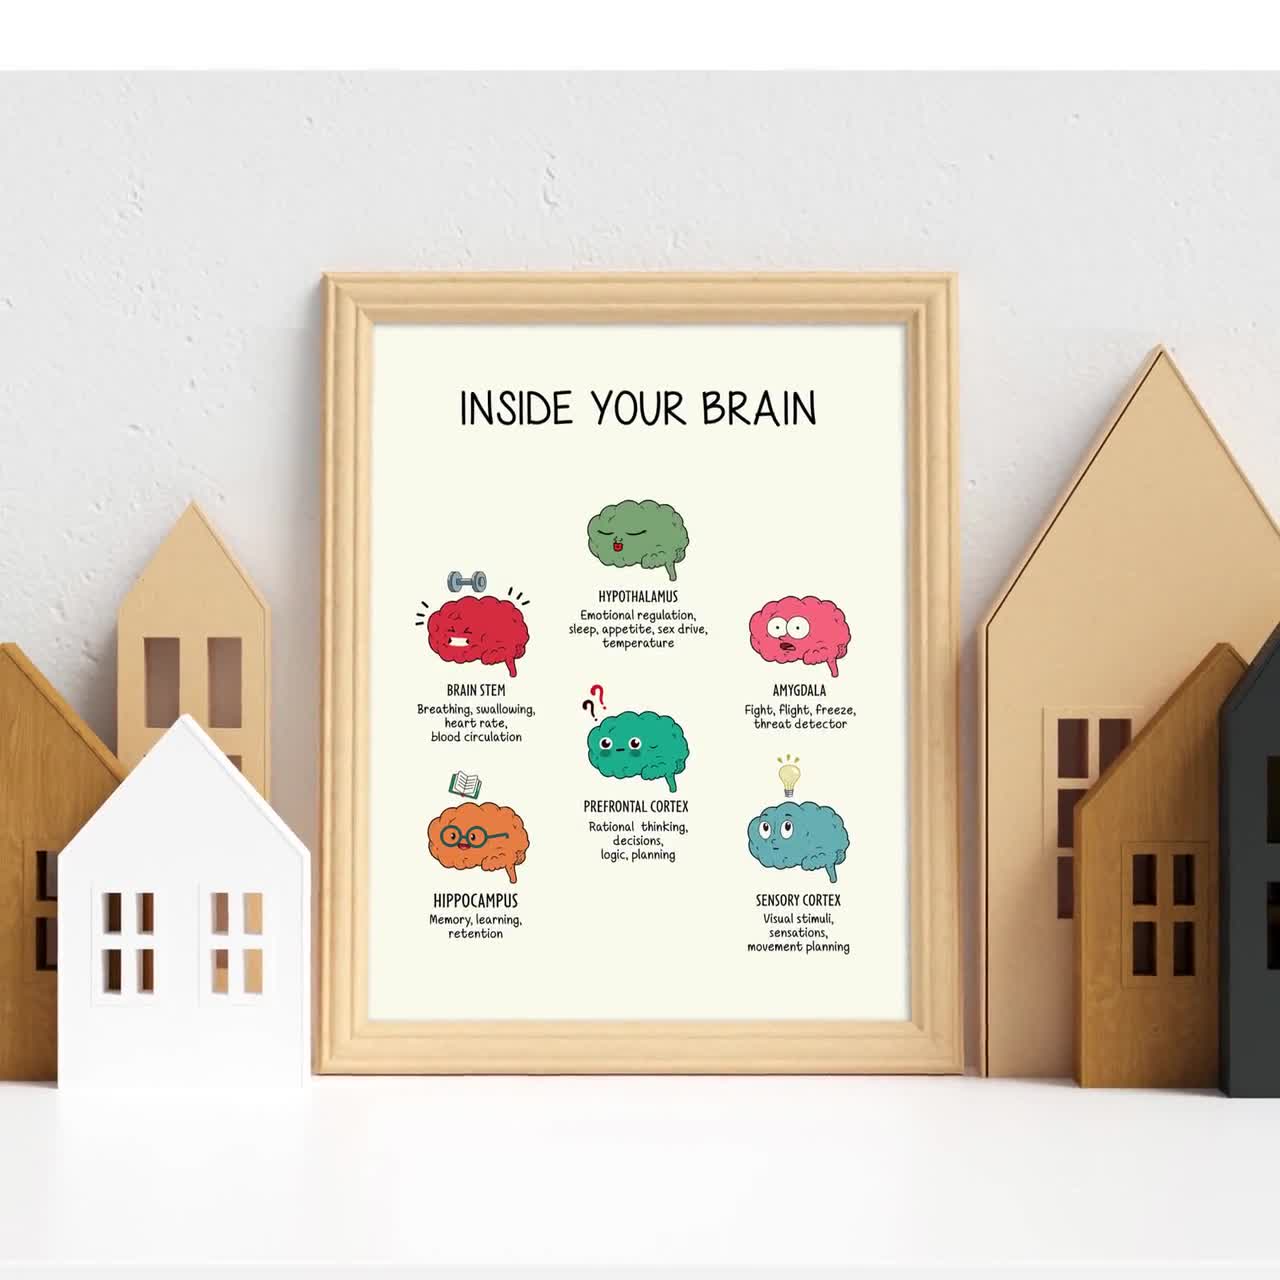 Brain Functions Poster Inside Your Brain the Human Brain